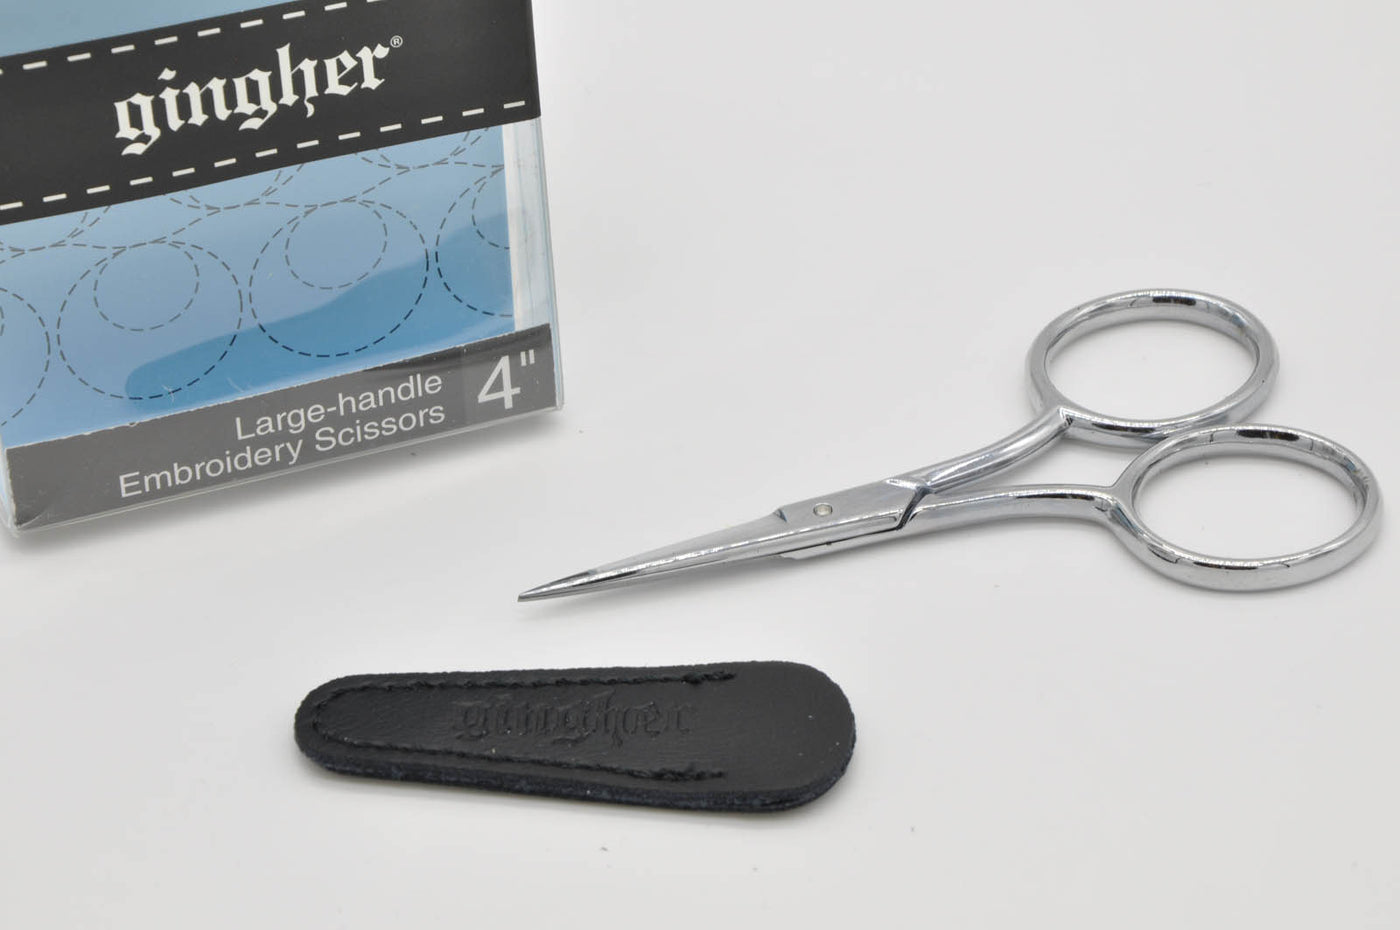 Gingher 4" Large-handle Embroidery Scissors